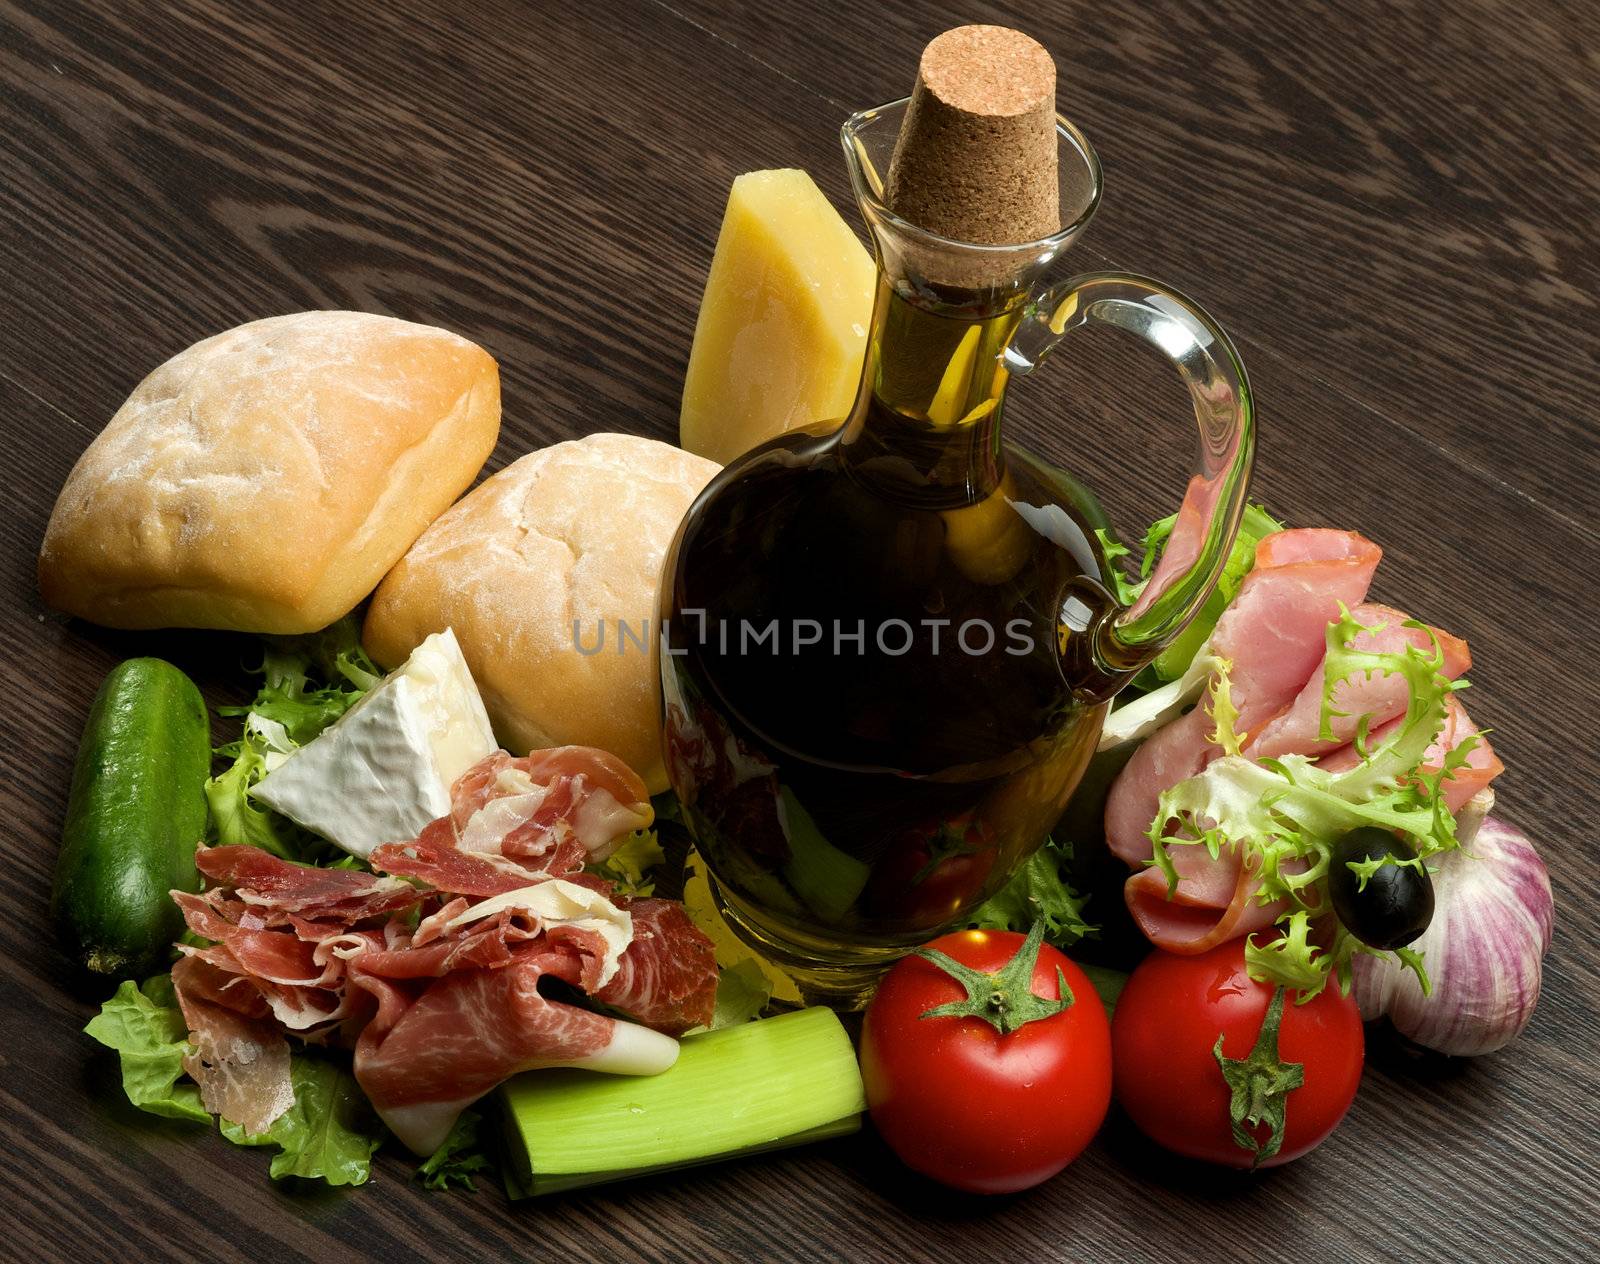 Provençal Still Life with Vegetables, Hamon, Ciabatta, Cheese and Olive Oil closeup on Dark Wood background